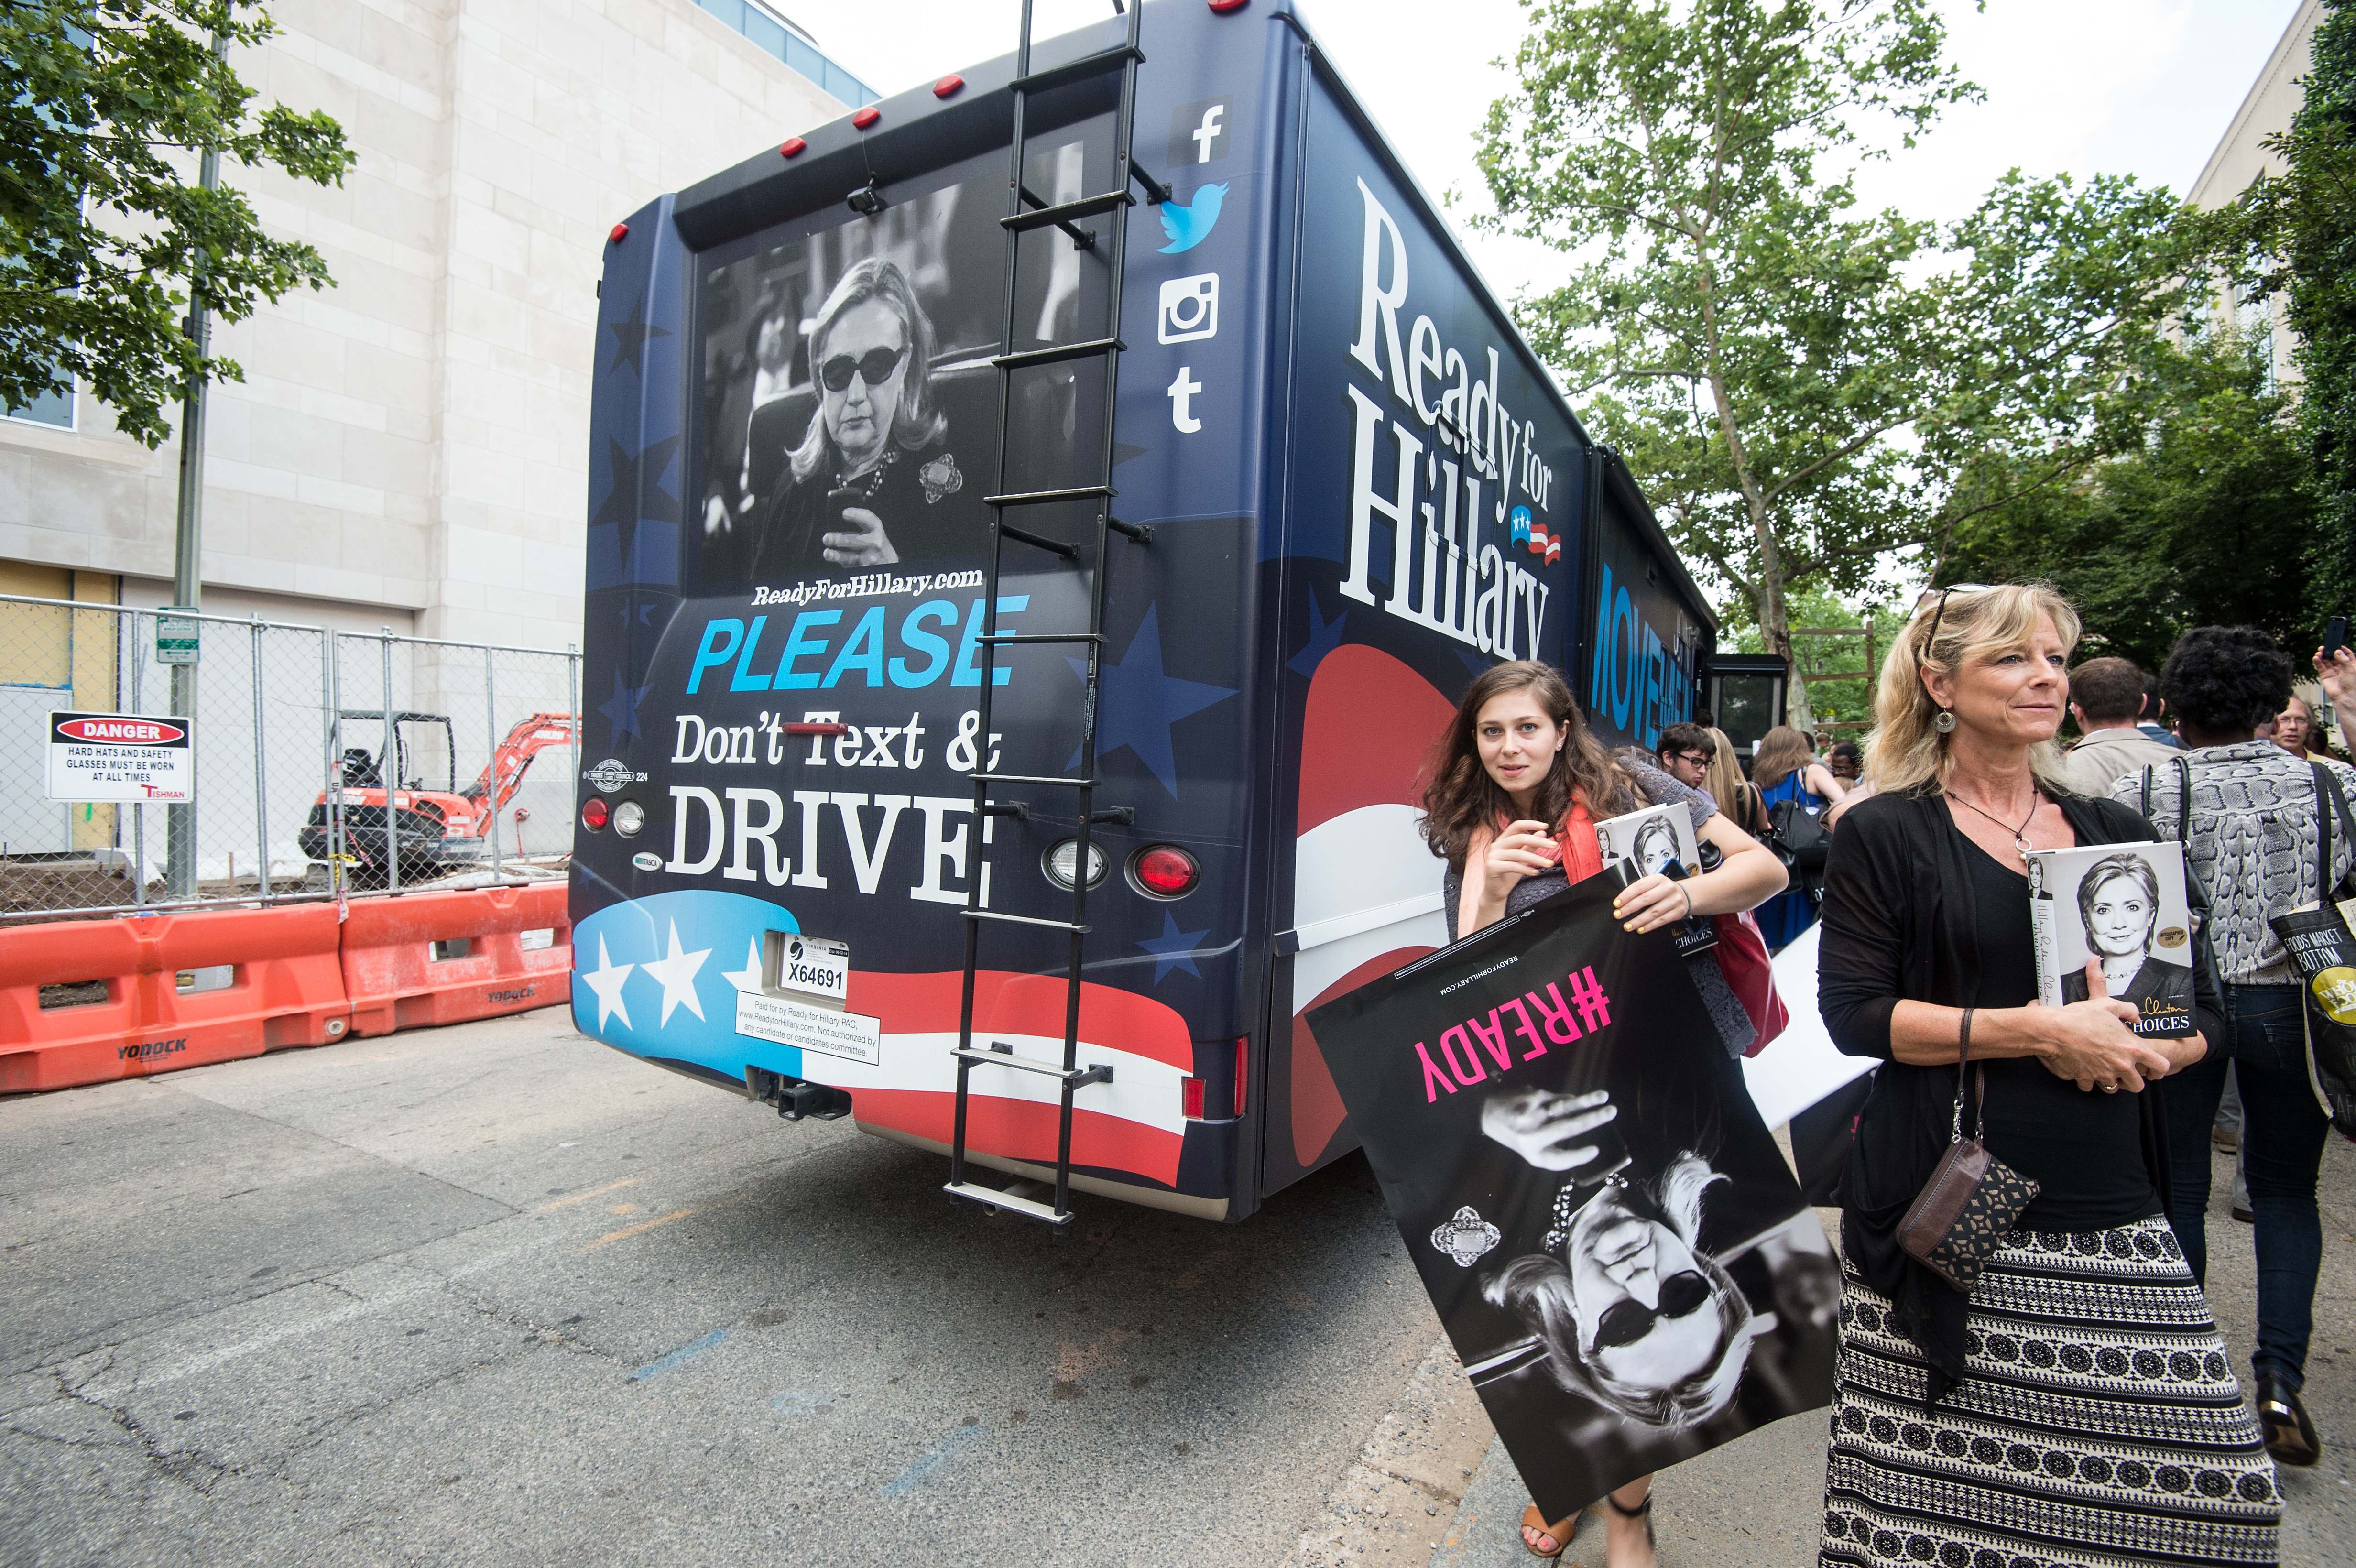 The Ready for Hillary bus in 2014. (NICHOLAS KAMM/AFP/Getty Images)